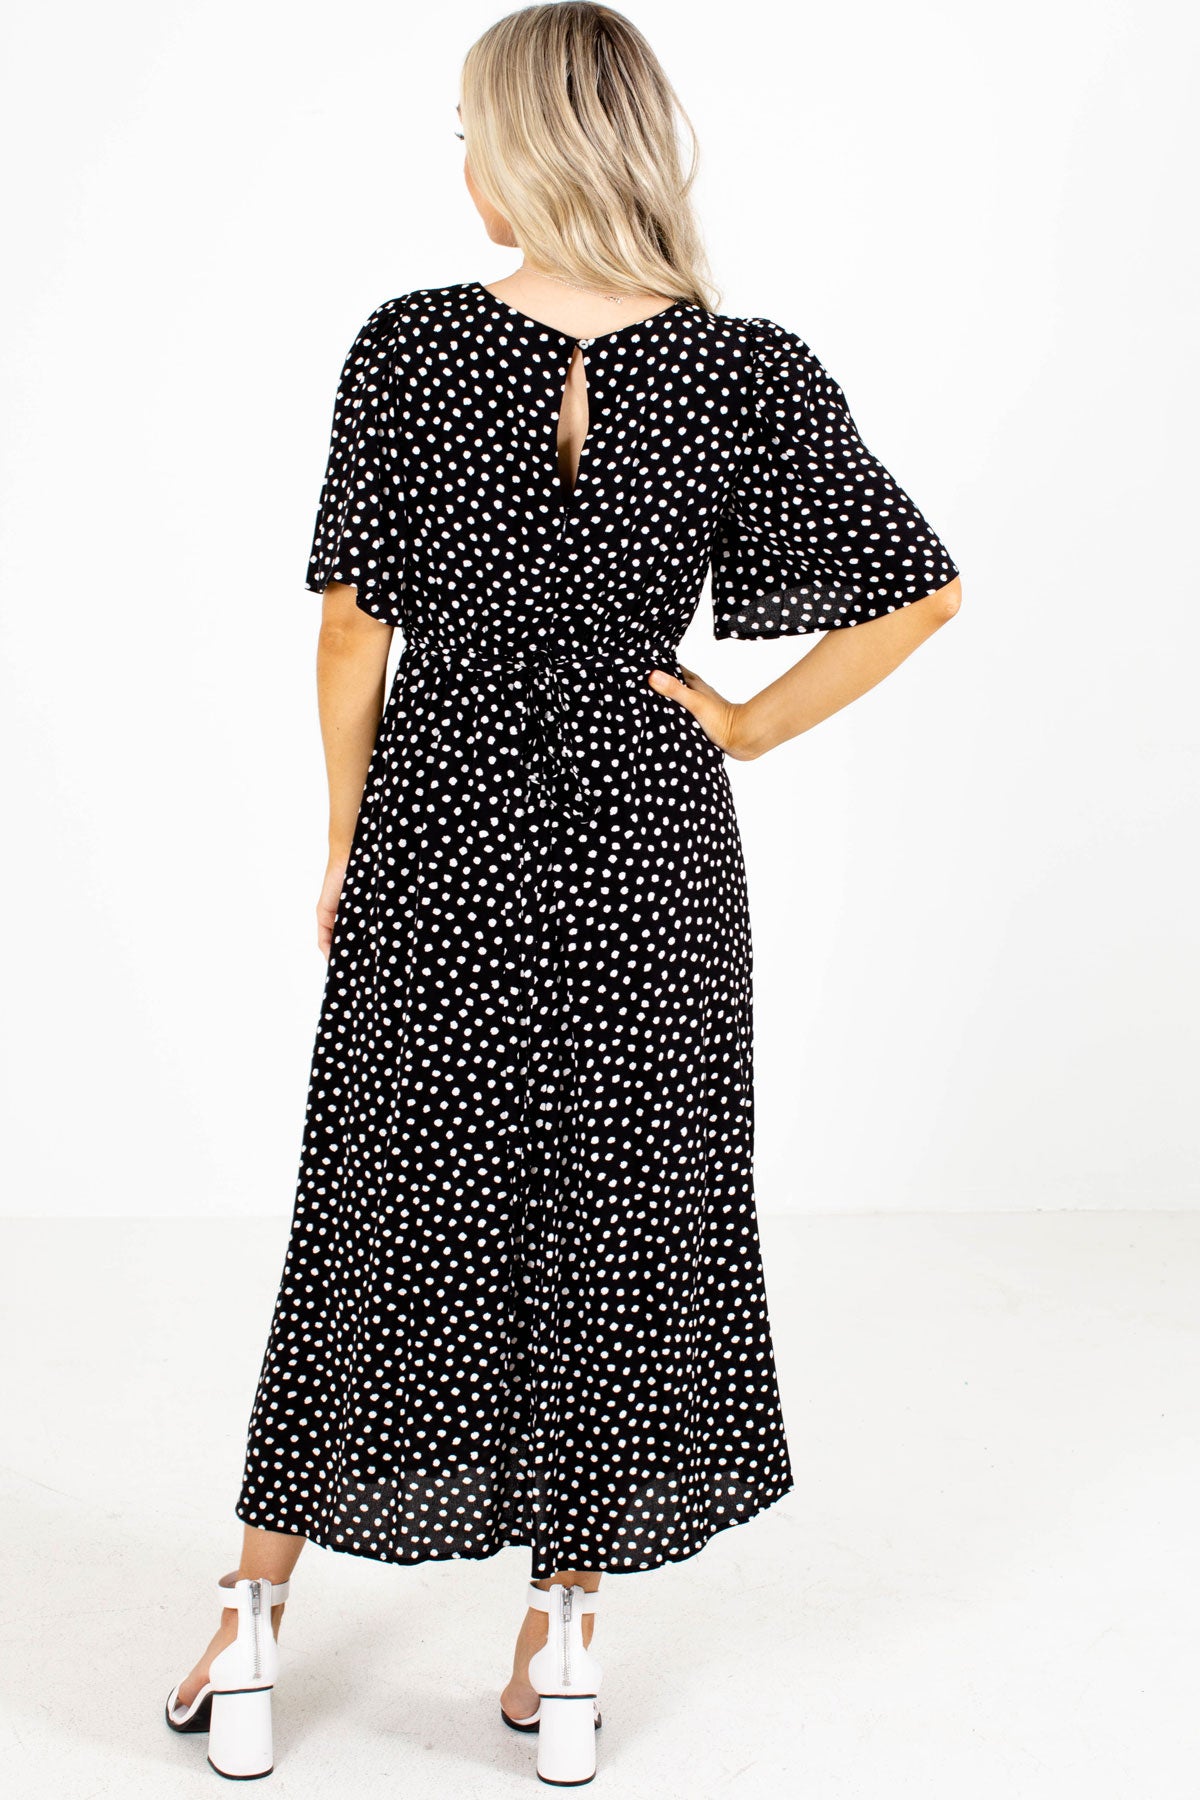 Maxi Dress with Black and White Polka Dots